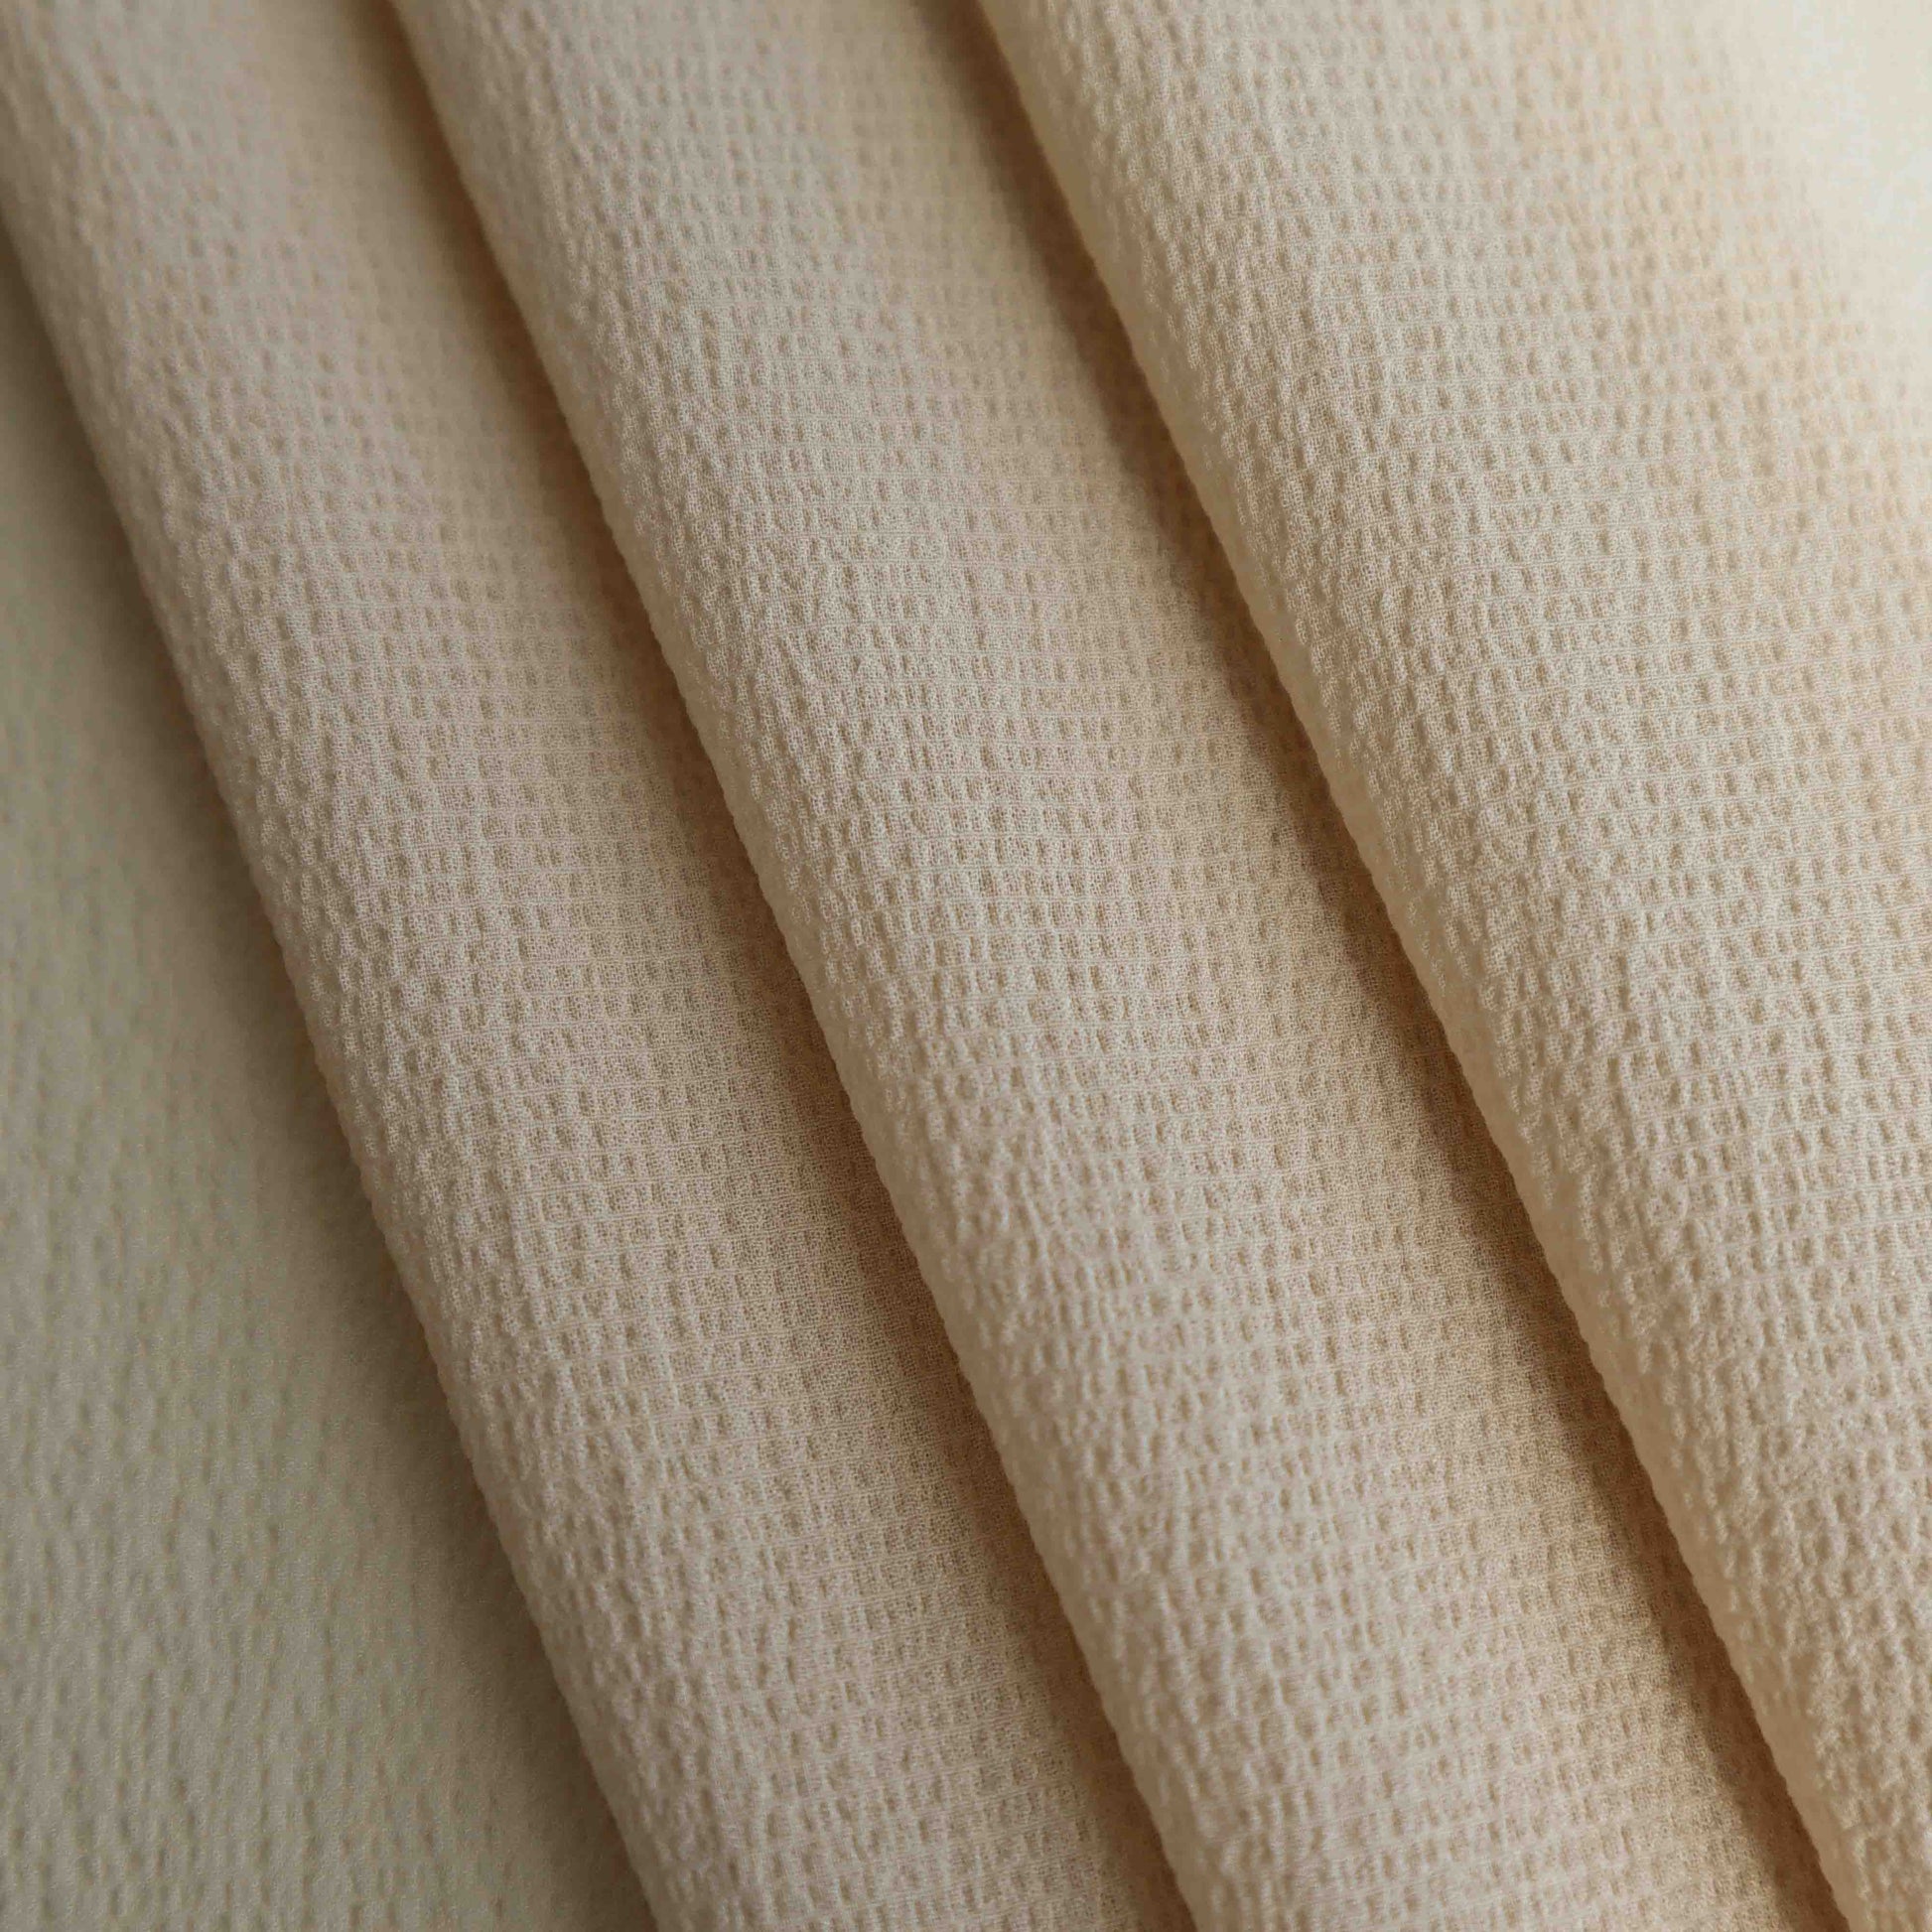 An European-made lightweight silk crepe in natural Shell. This fabric has a dry, smooth hand feel yet softens considerably after washing. This fluid-non stretch fabric has subtle texture throughout and matte finish.